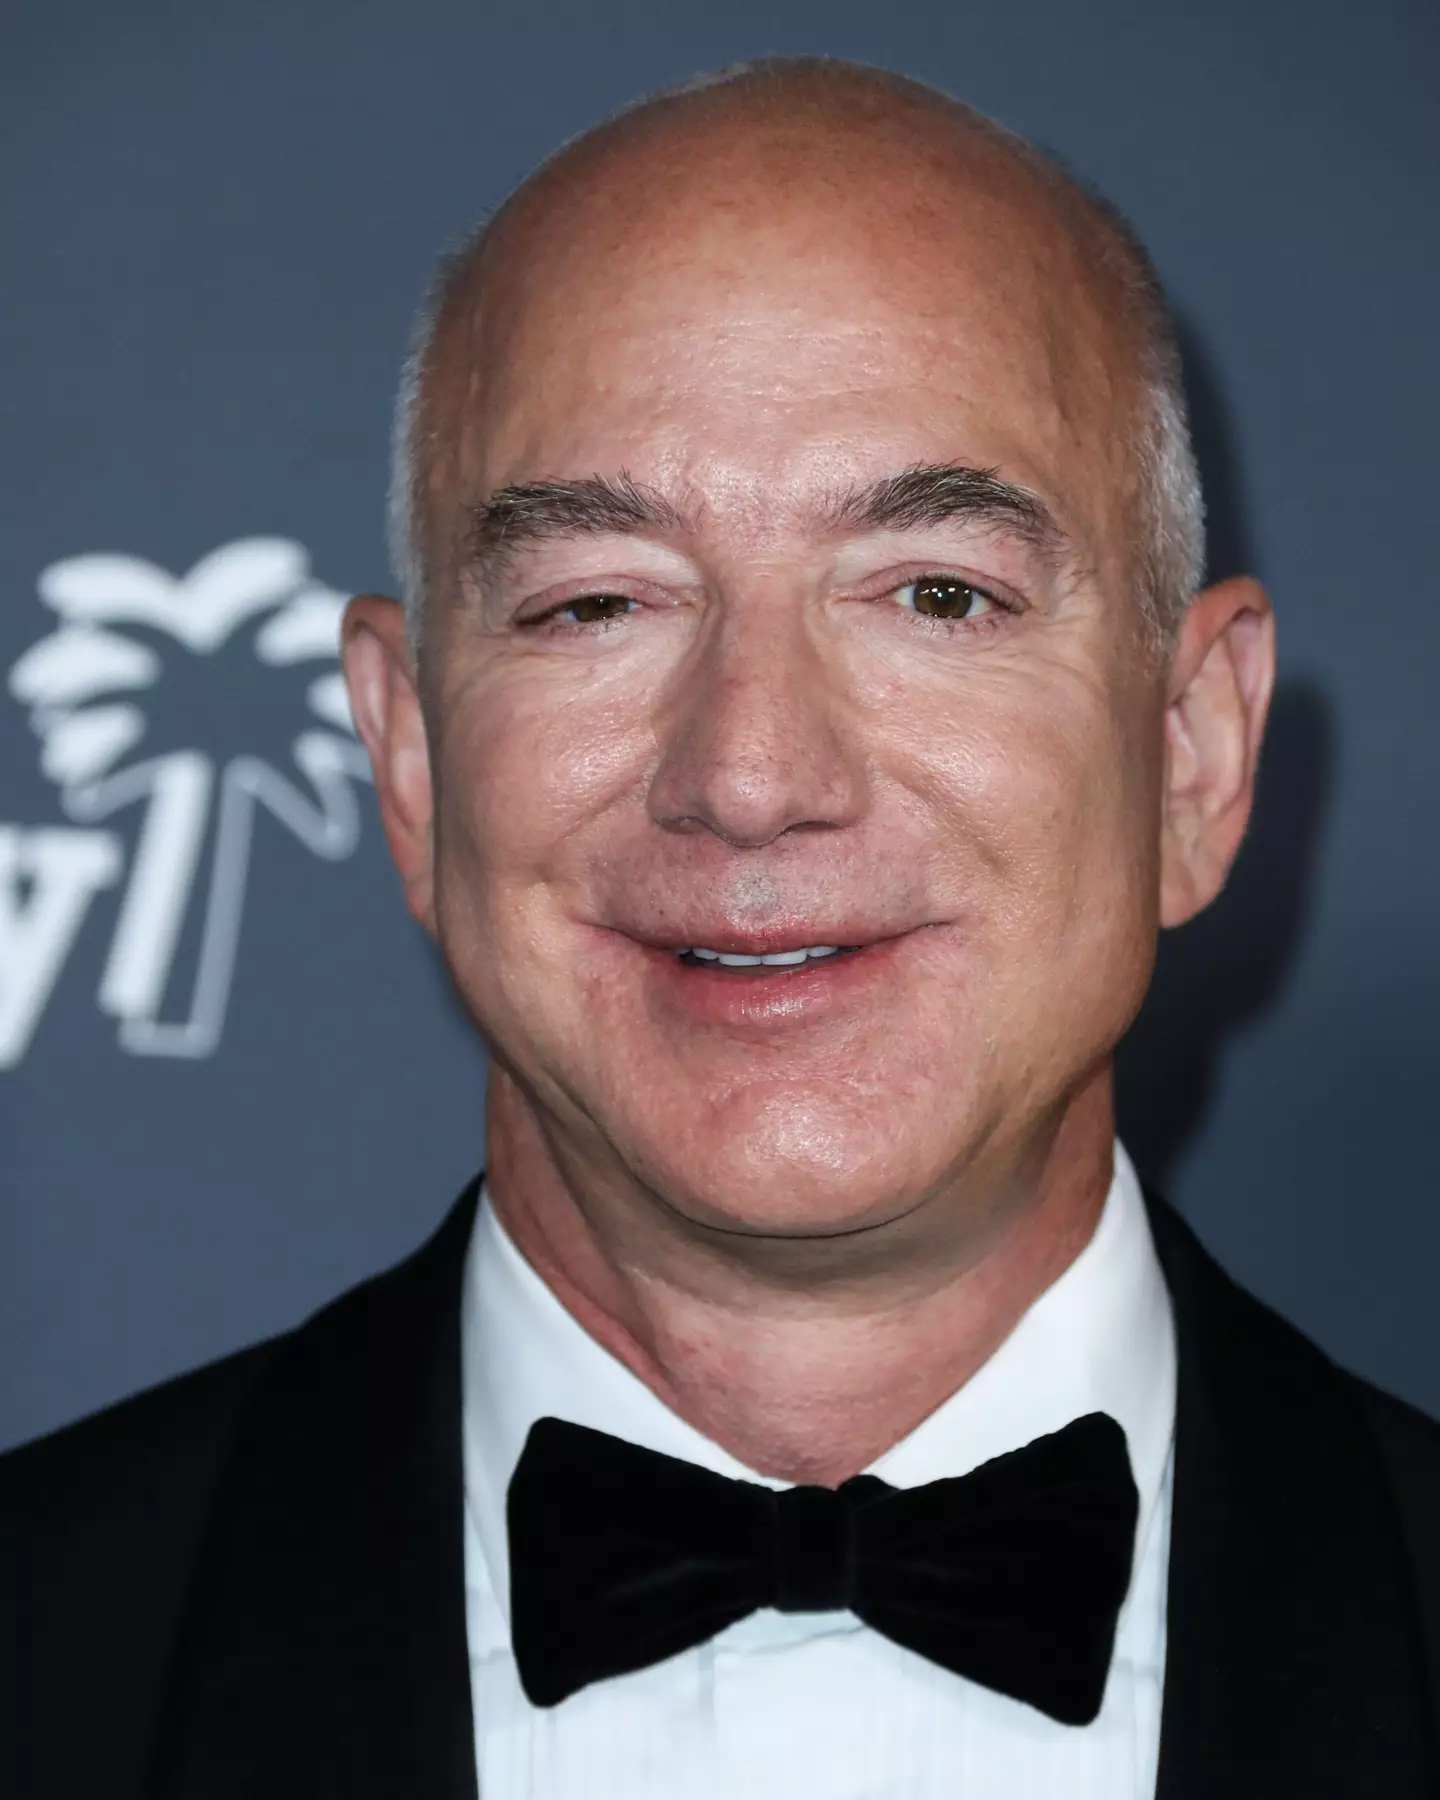 Jeff Bezos has lost a big chunk of his wealth over the past few months.